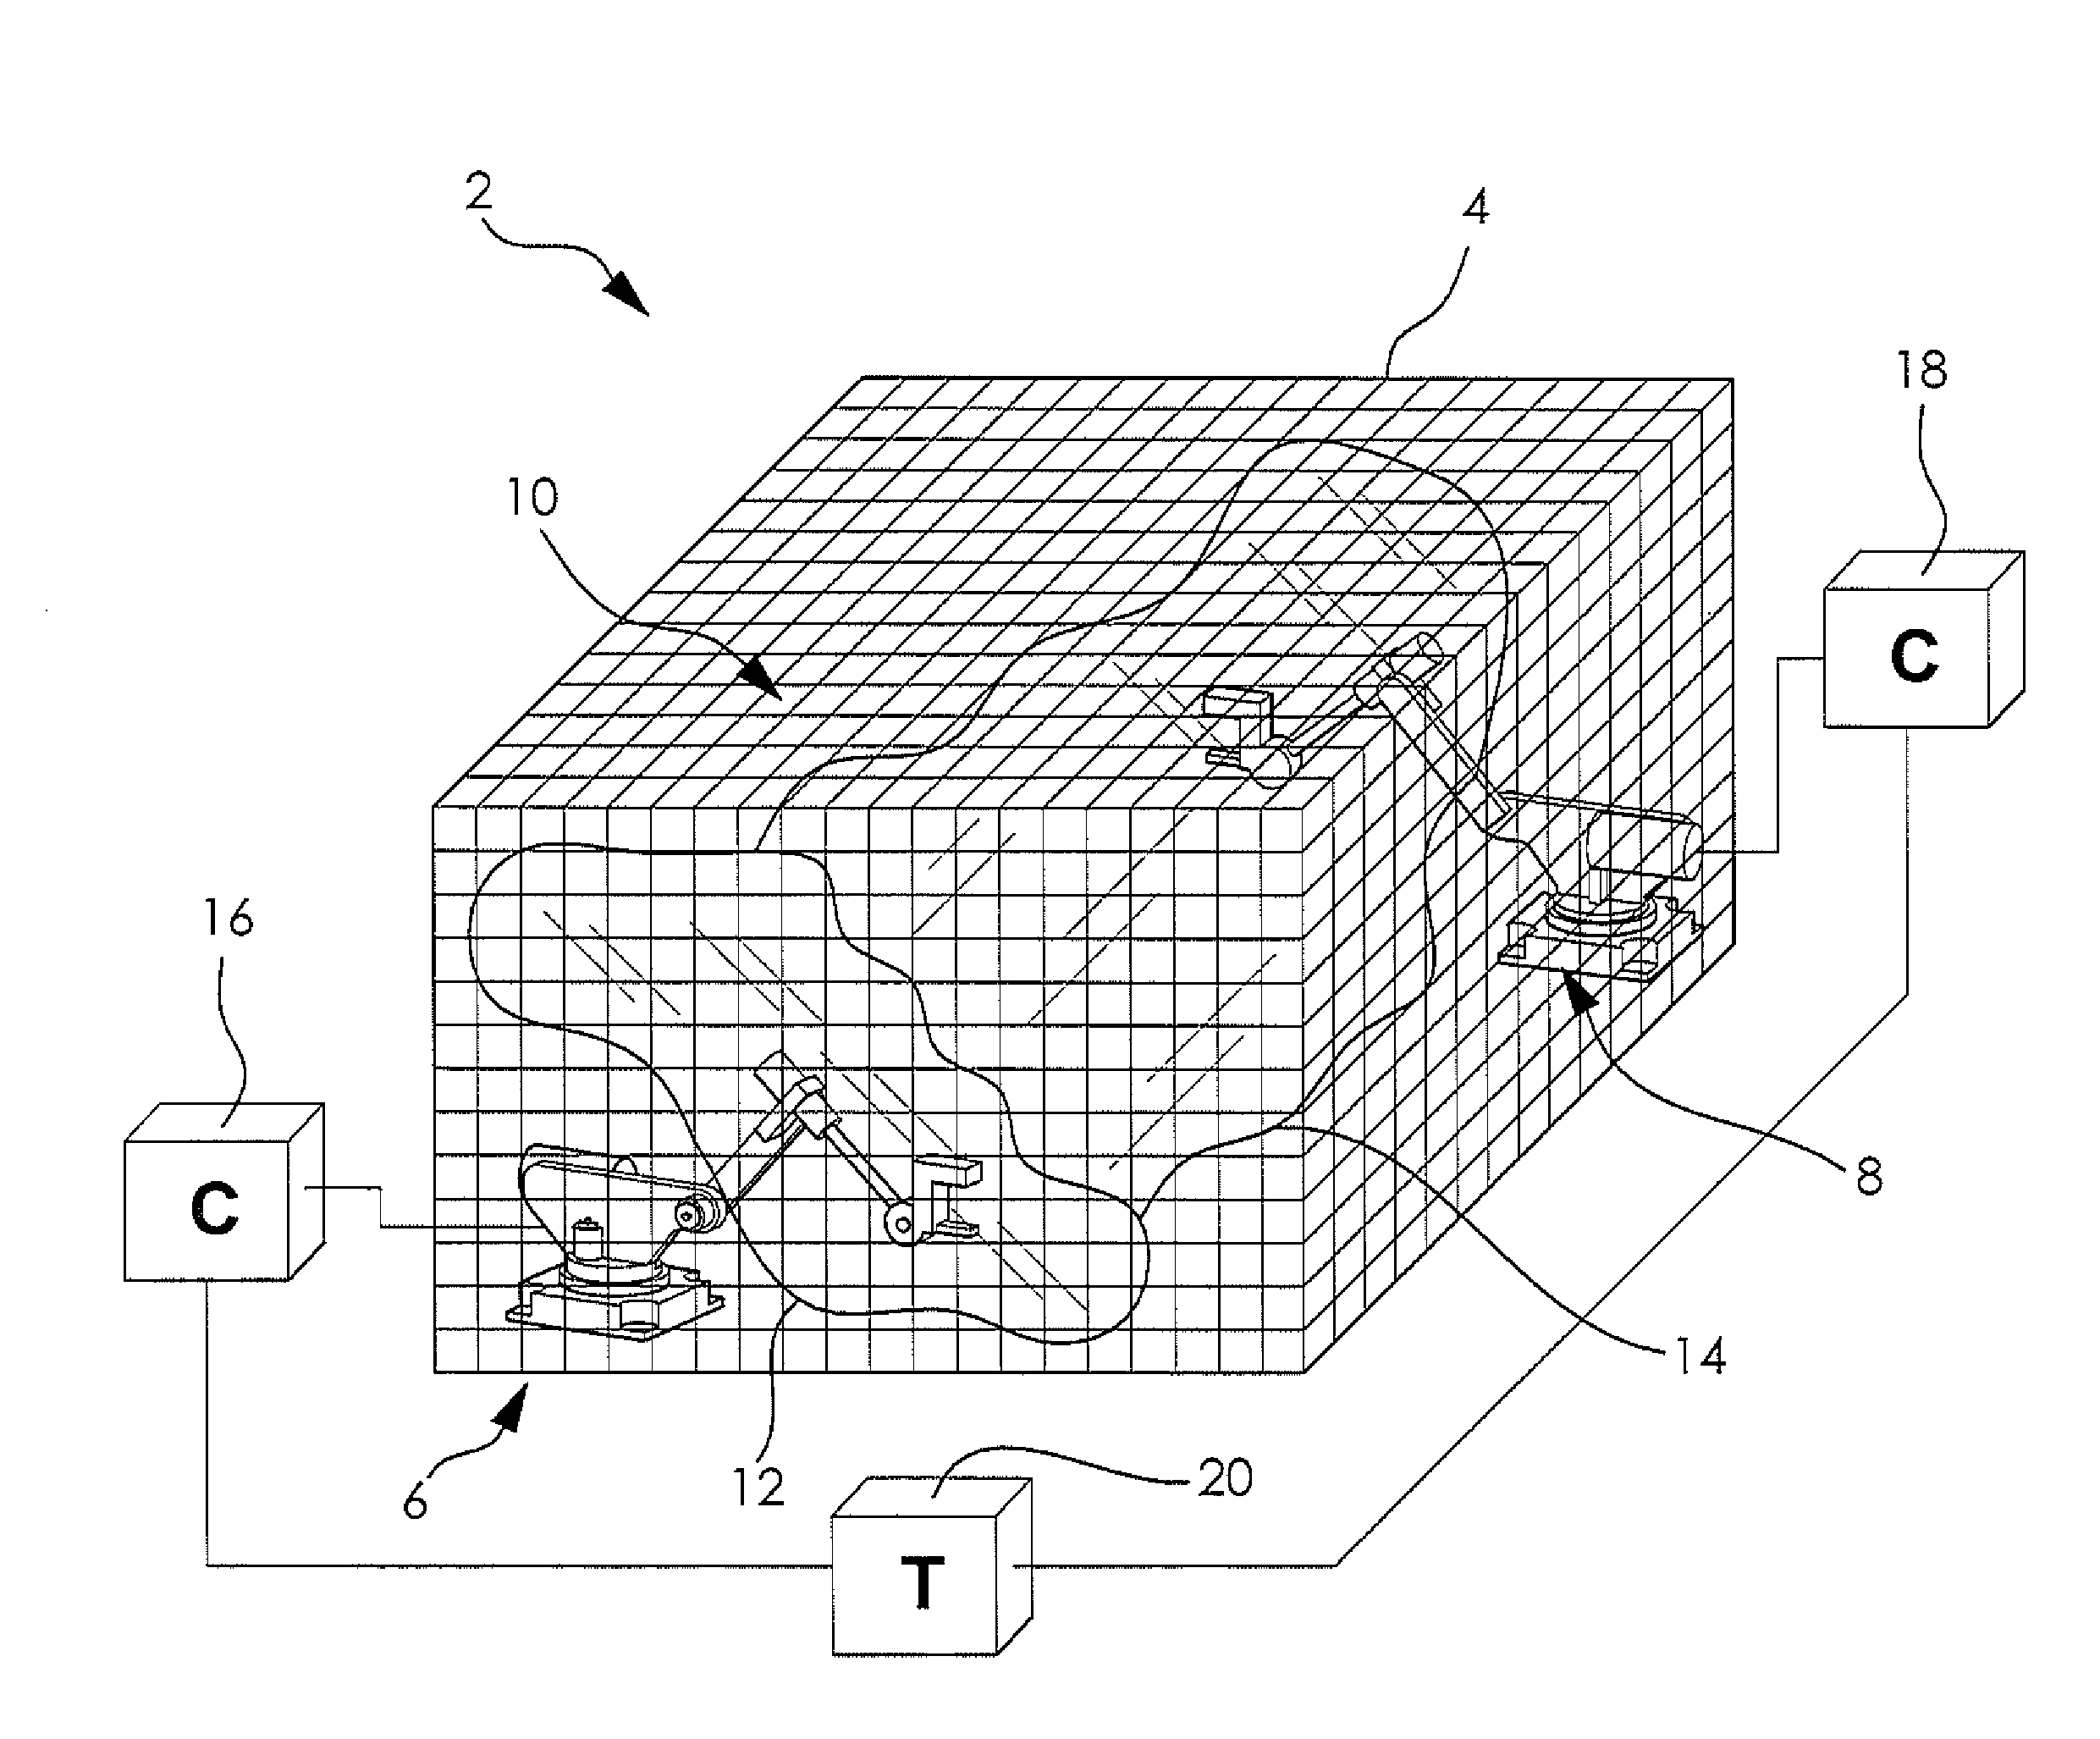 Method and system for automatically preventing deadlock in multi-robot systems